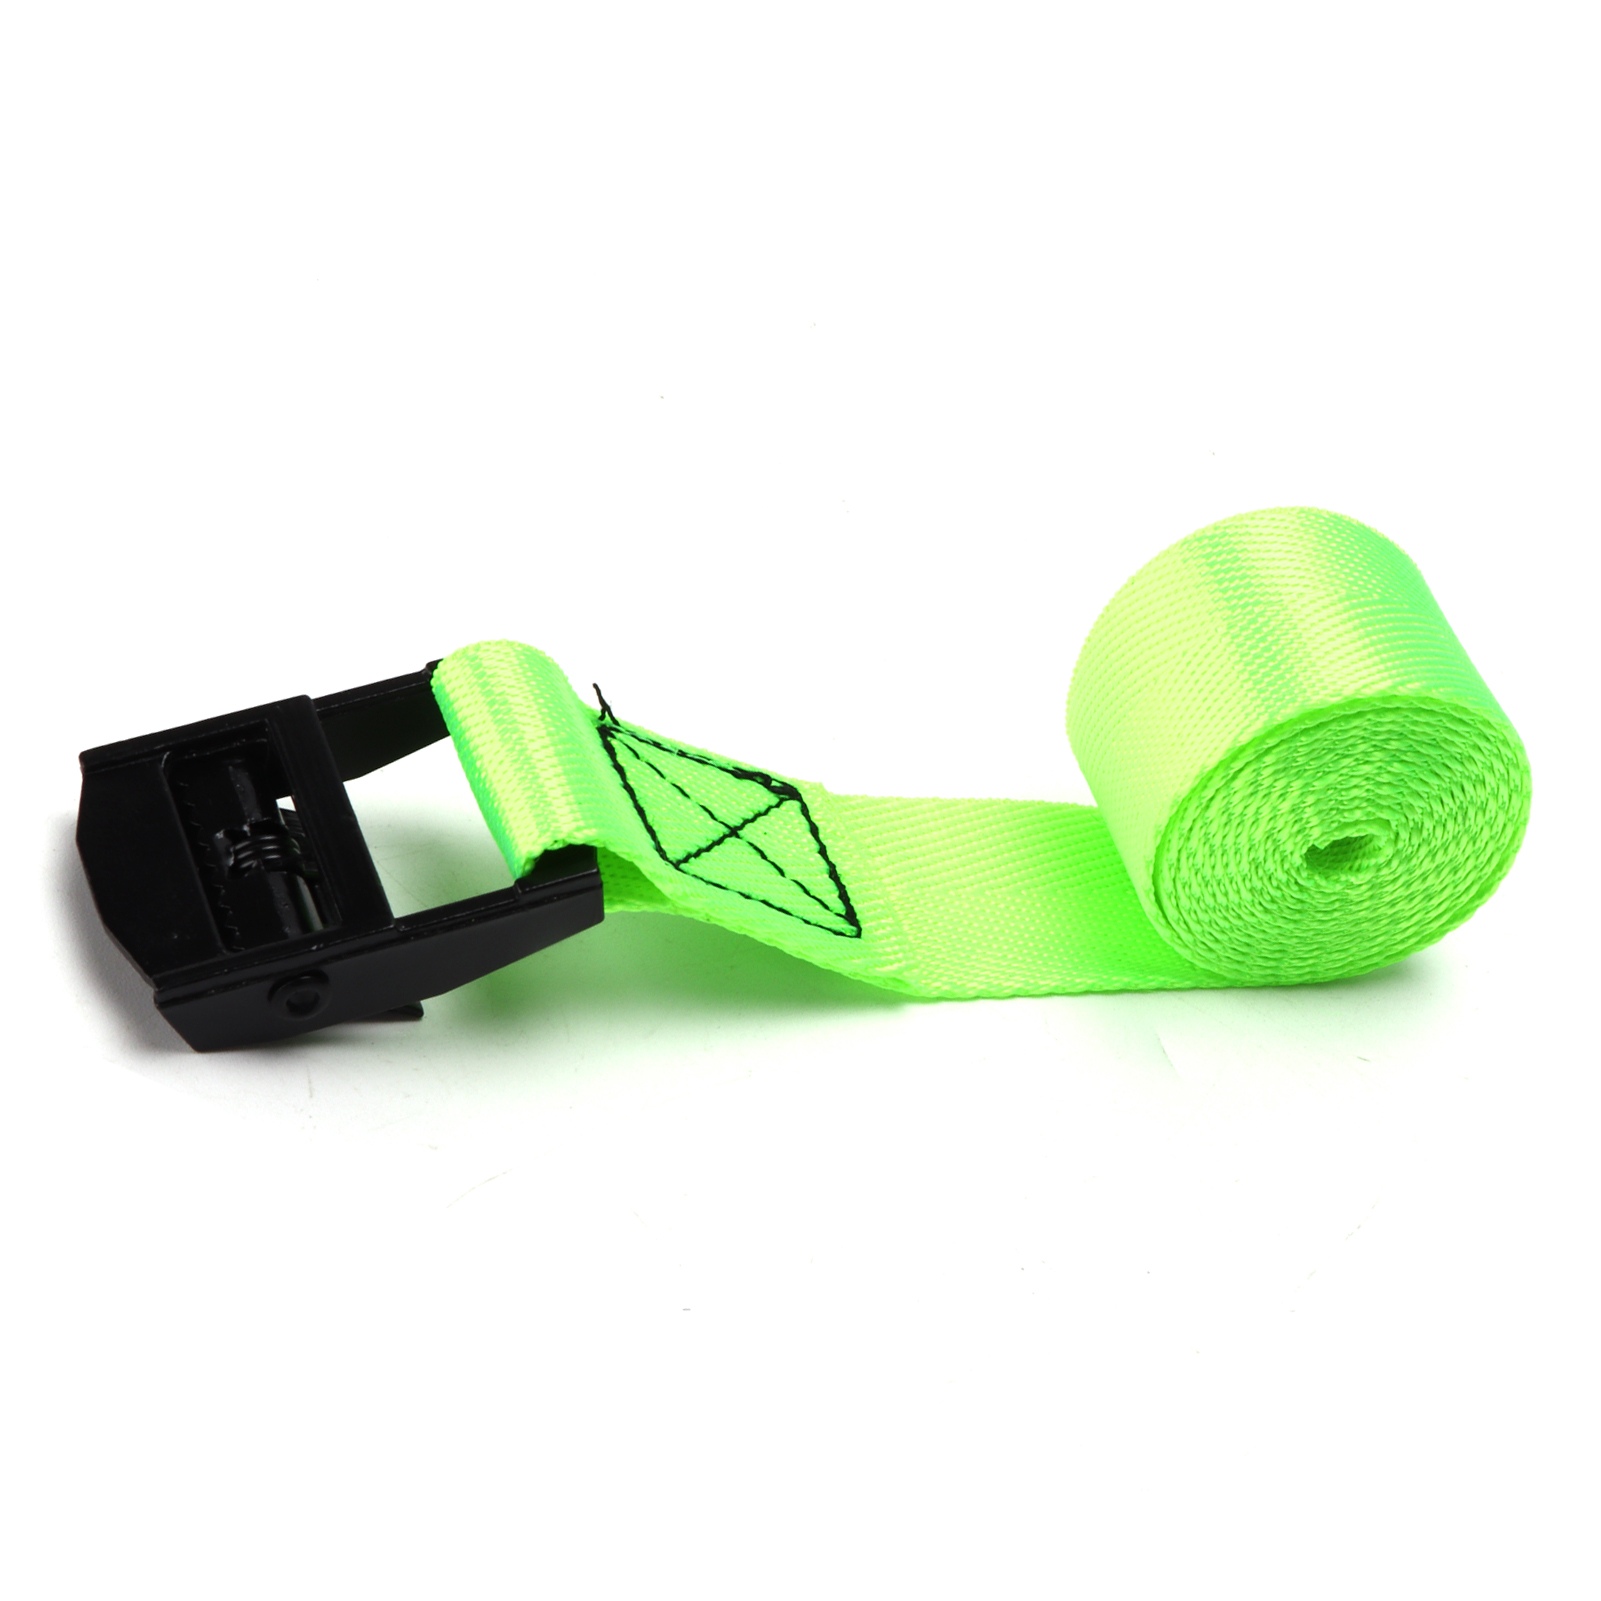 Lashing Straps, Nylon Strap With Buckle High Strength For Heavy